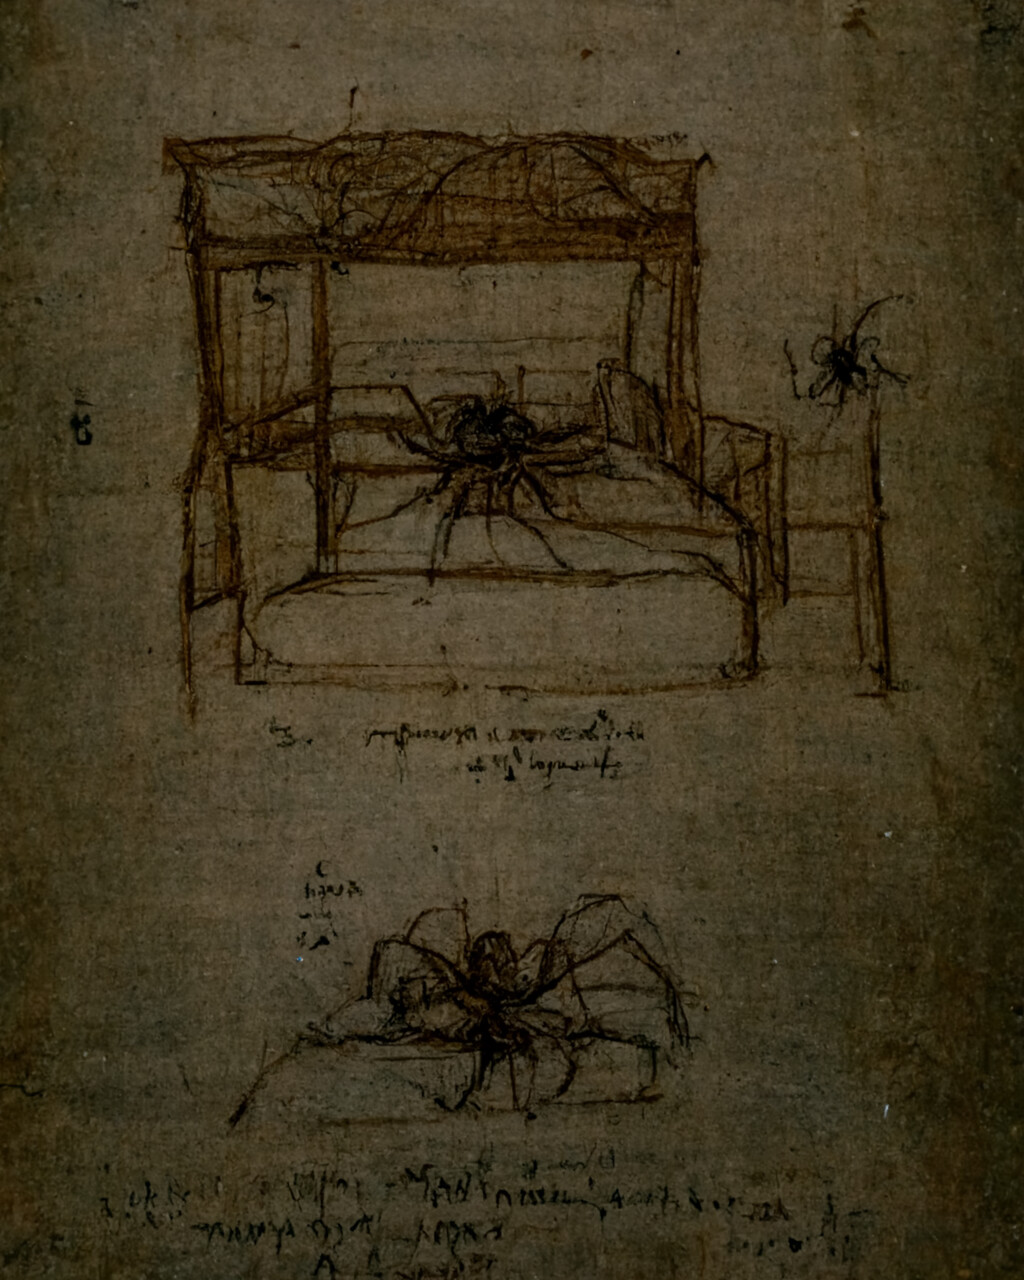 "I again counted, and this time the web was [gone]. In its place, a large spider. I counted its legs. Eight, then Seven, then Six. With each count, they disappeared. My eyes wander. I draw them back. 
Does my counting drive them away?"